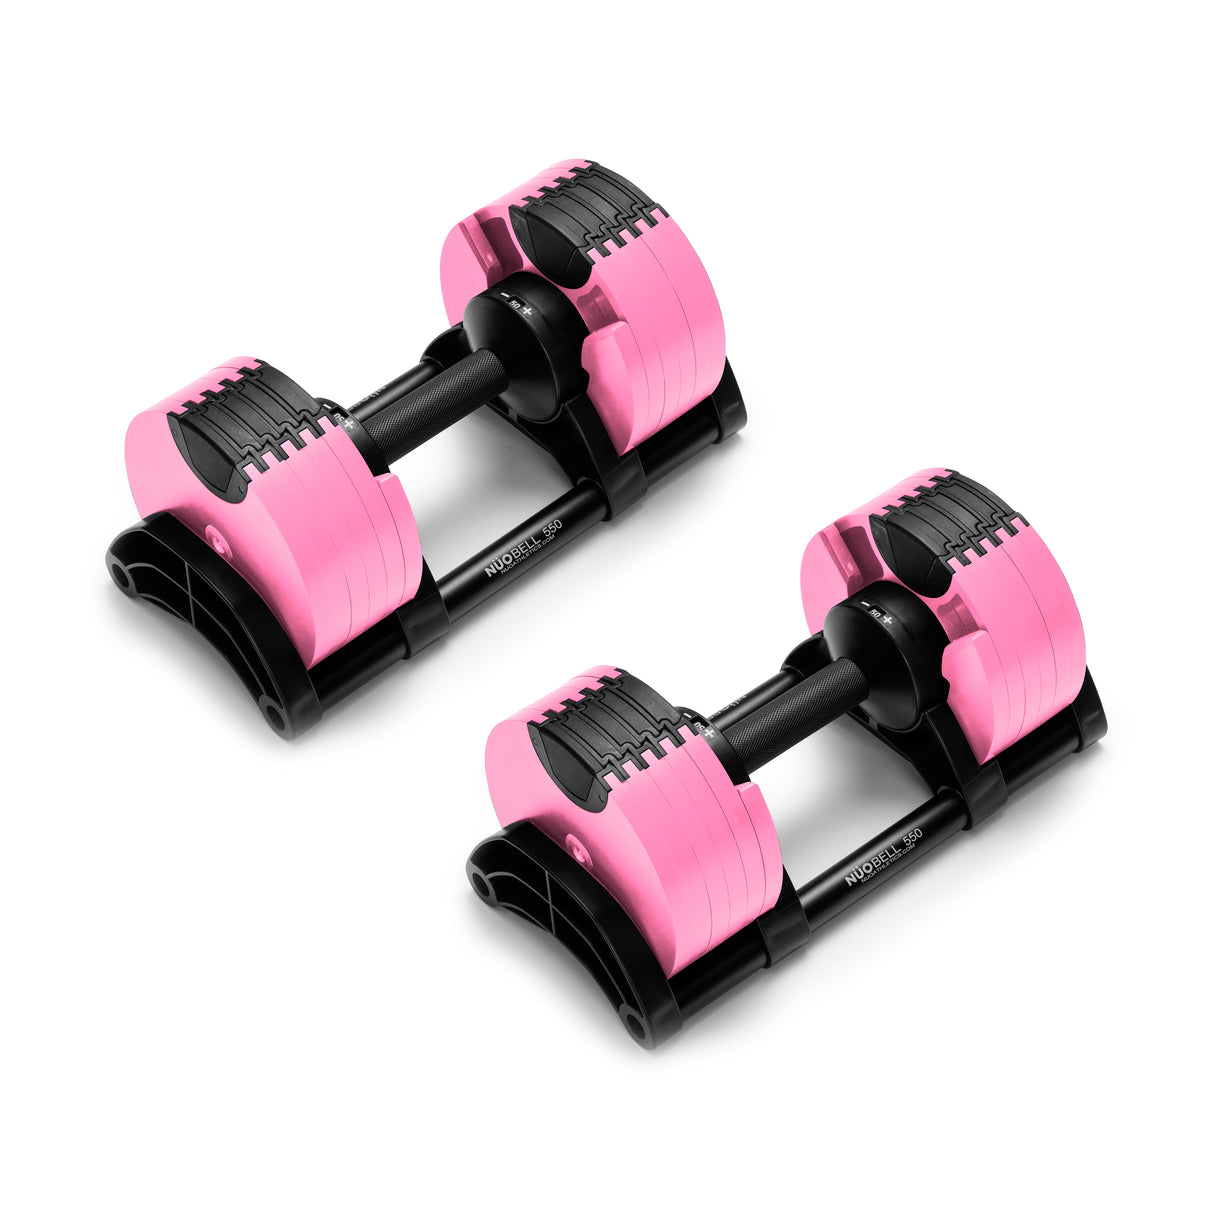 Nuobell Adjustable Dumbbells - Pink 5-50 LB (Pair)